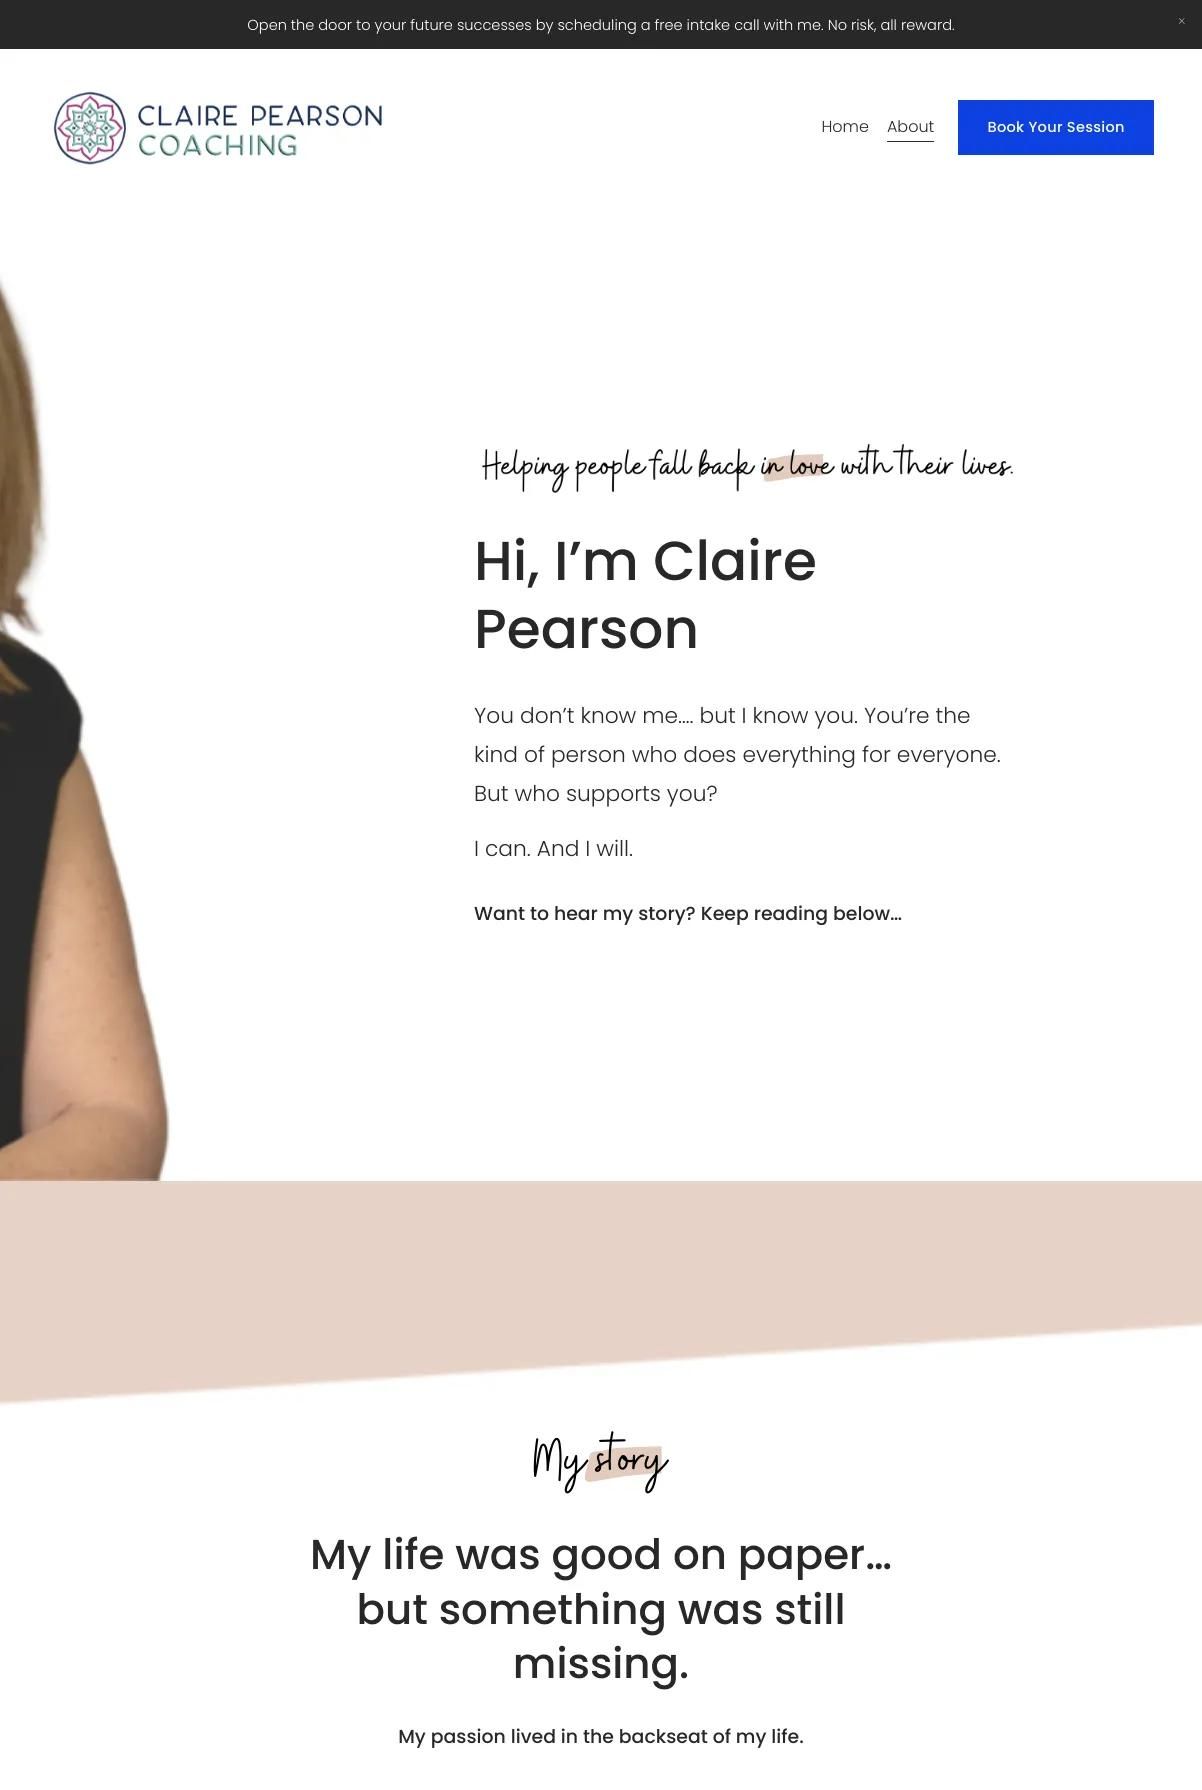 Screenshot 2 of Claire Pearson Coaching (Example Squarespace Coach Website)